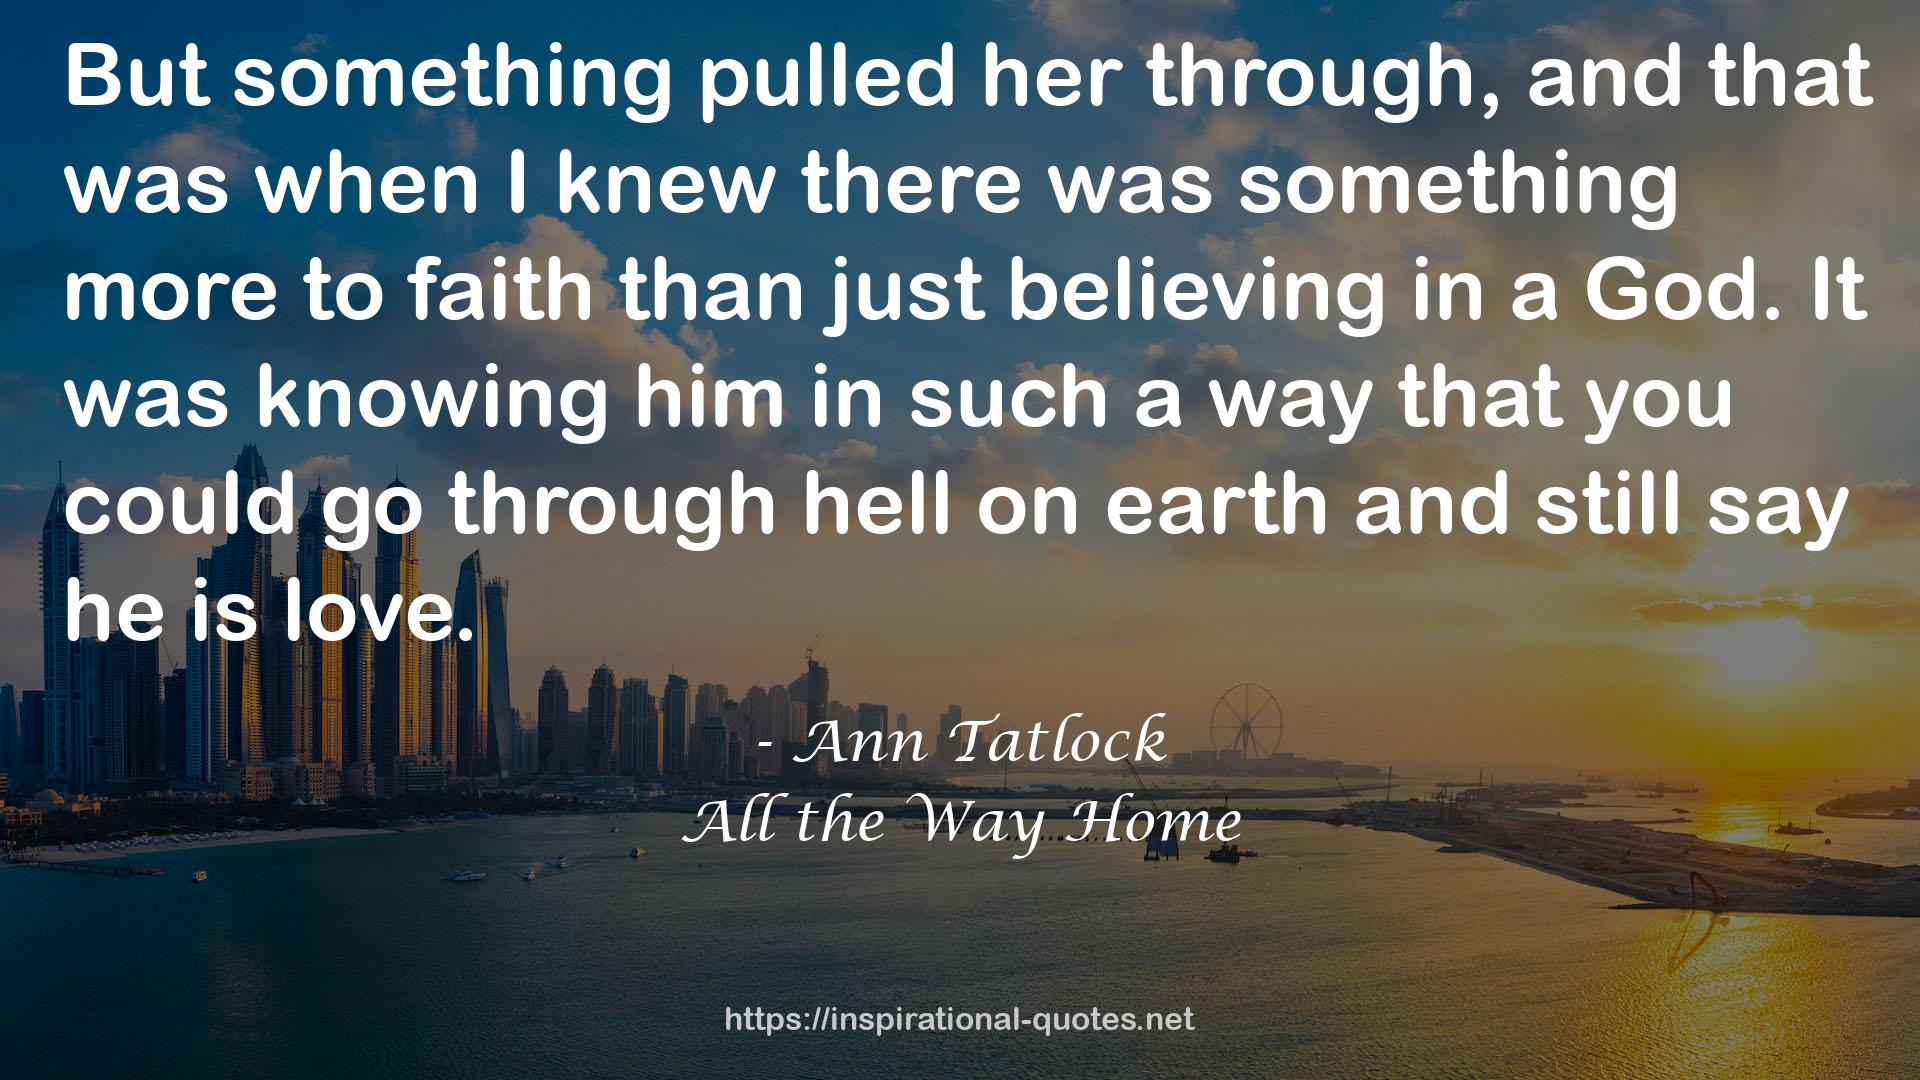 All the Way Home QUOTES